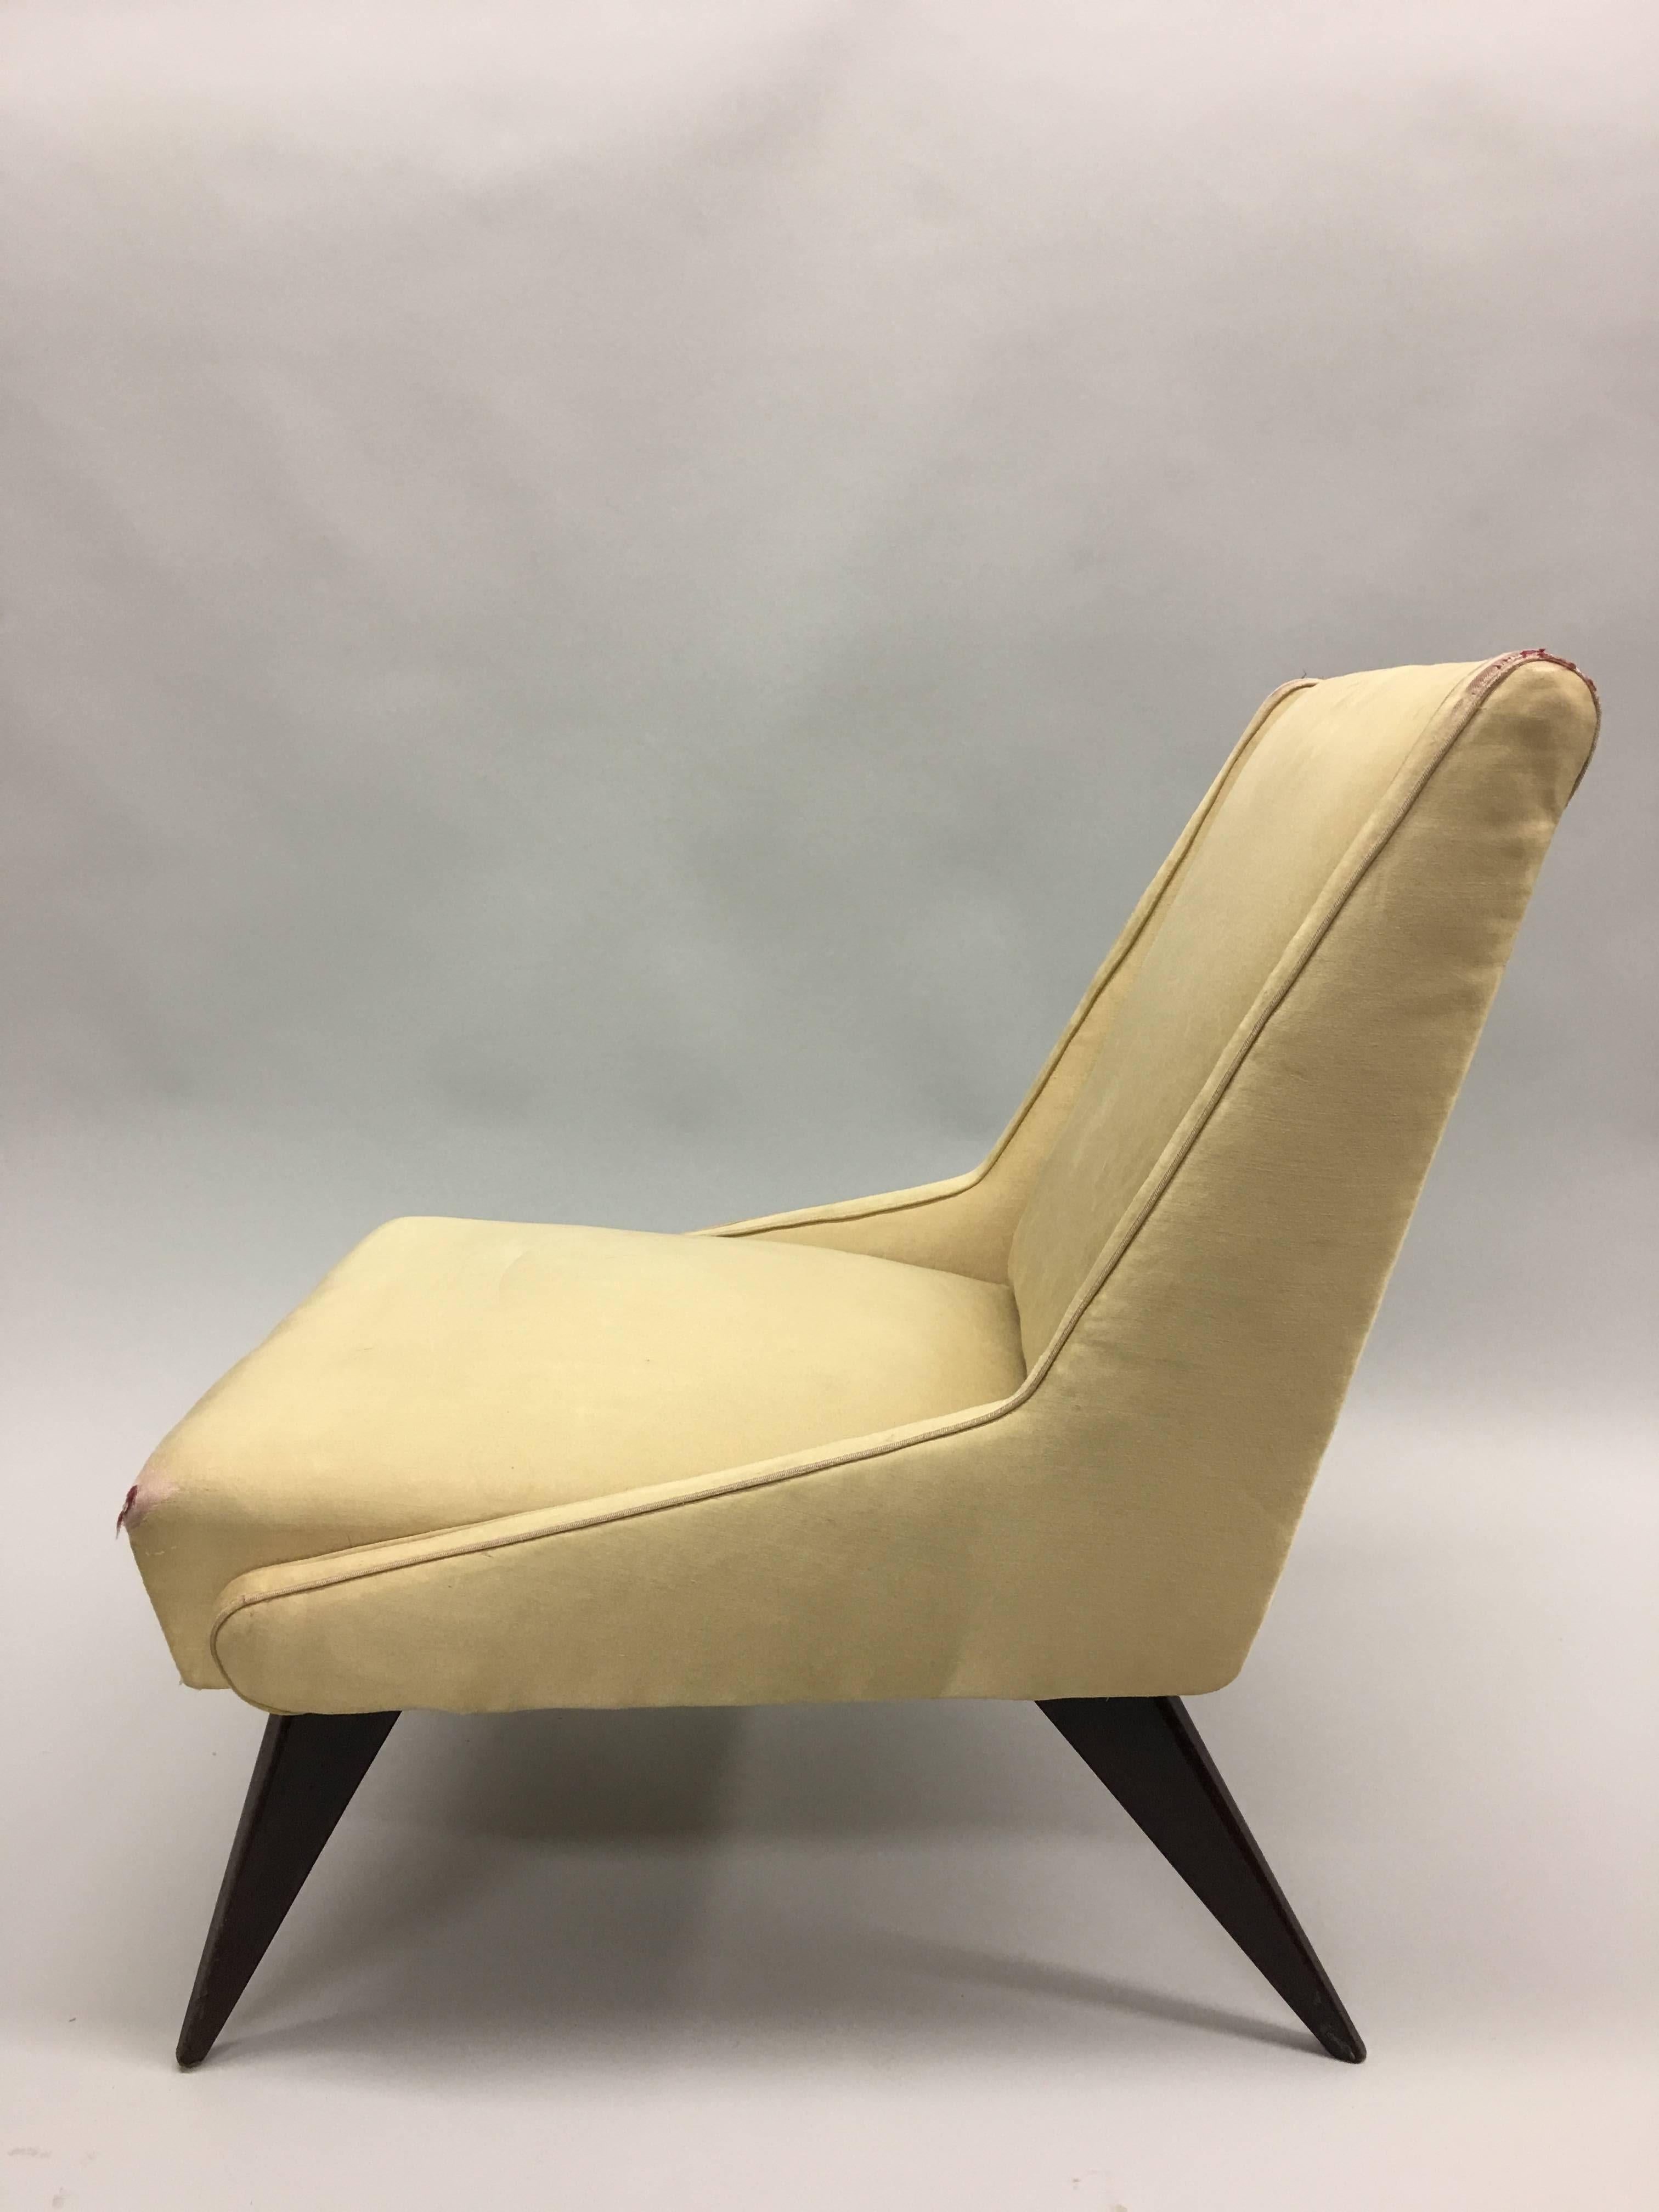 Pair of Italian Mid-Century Modern Lounge / Slipper Chairs by ISA, 1950 In Good Condition For Sale In New York, NY